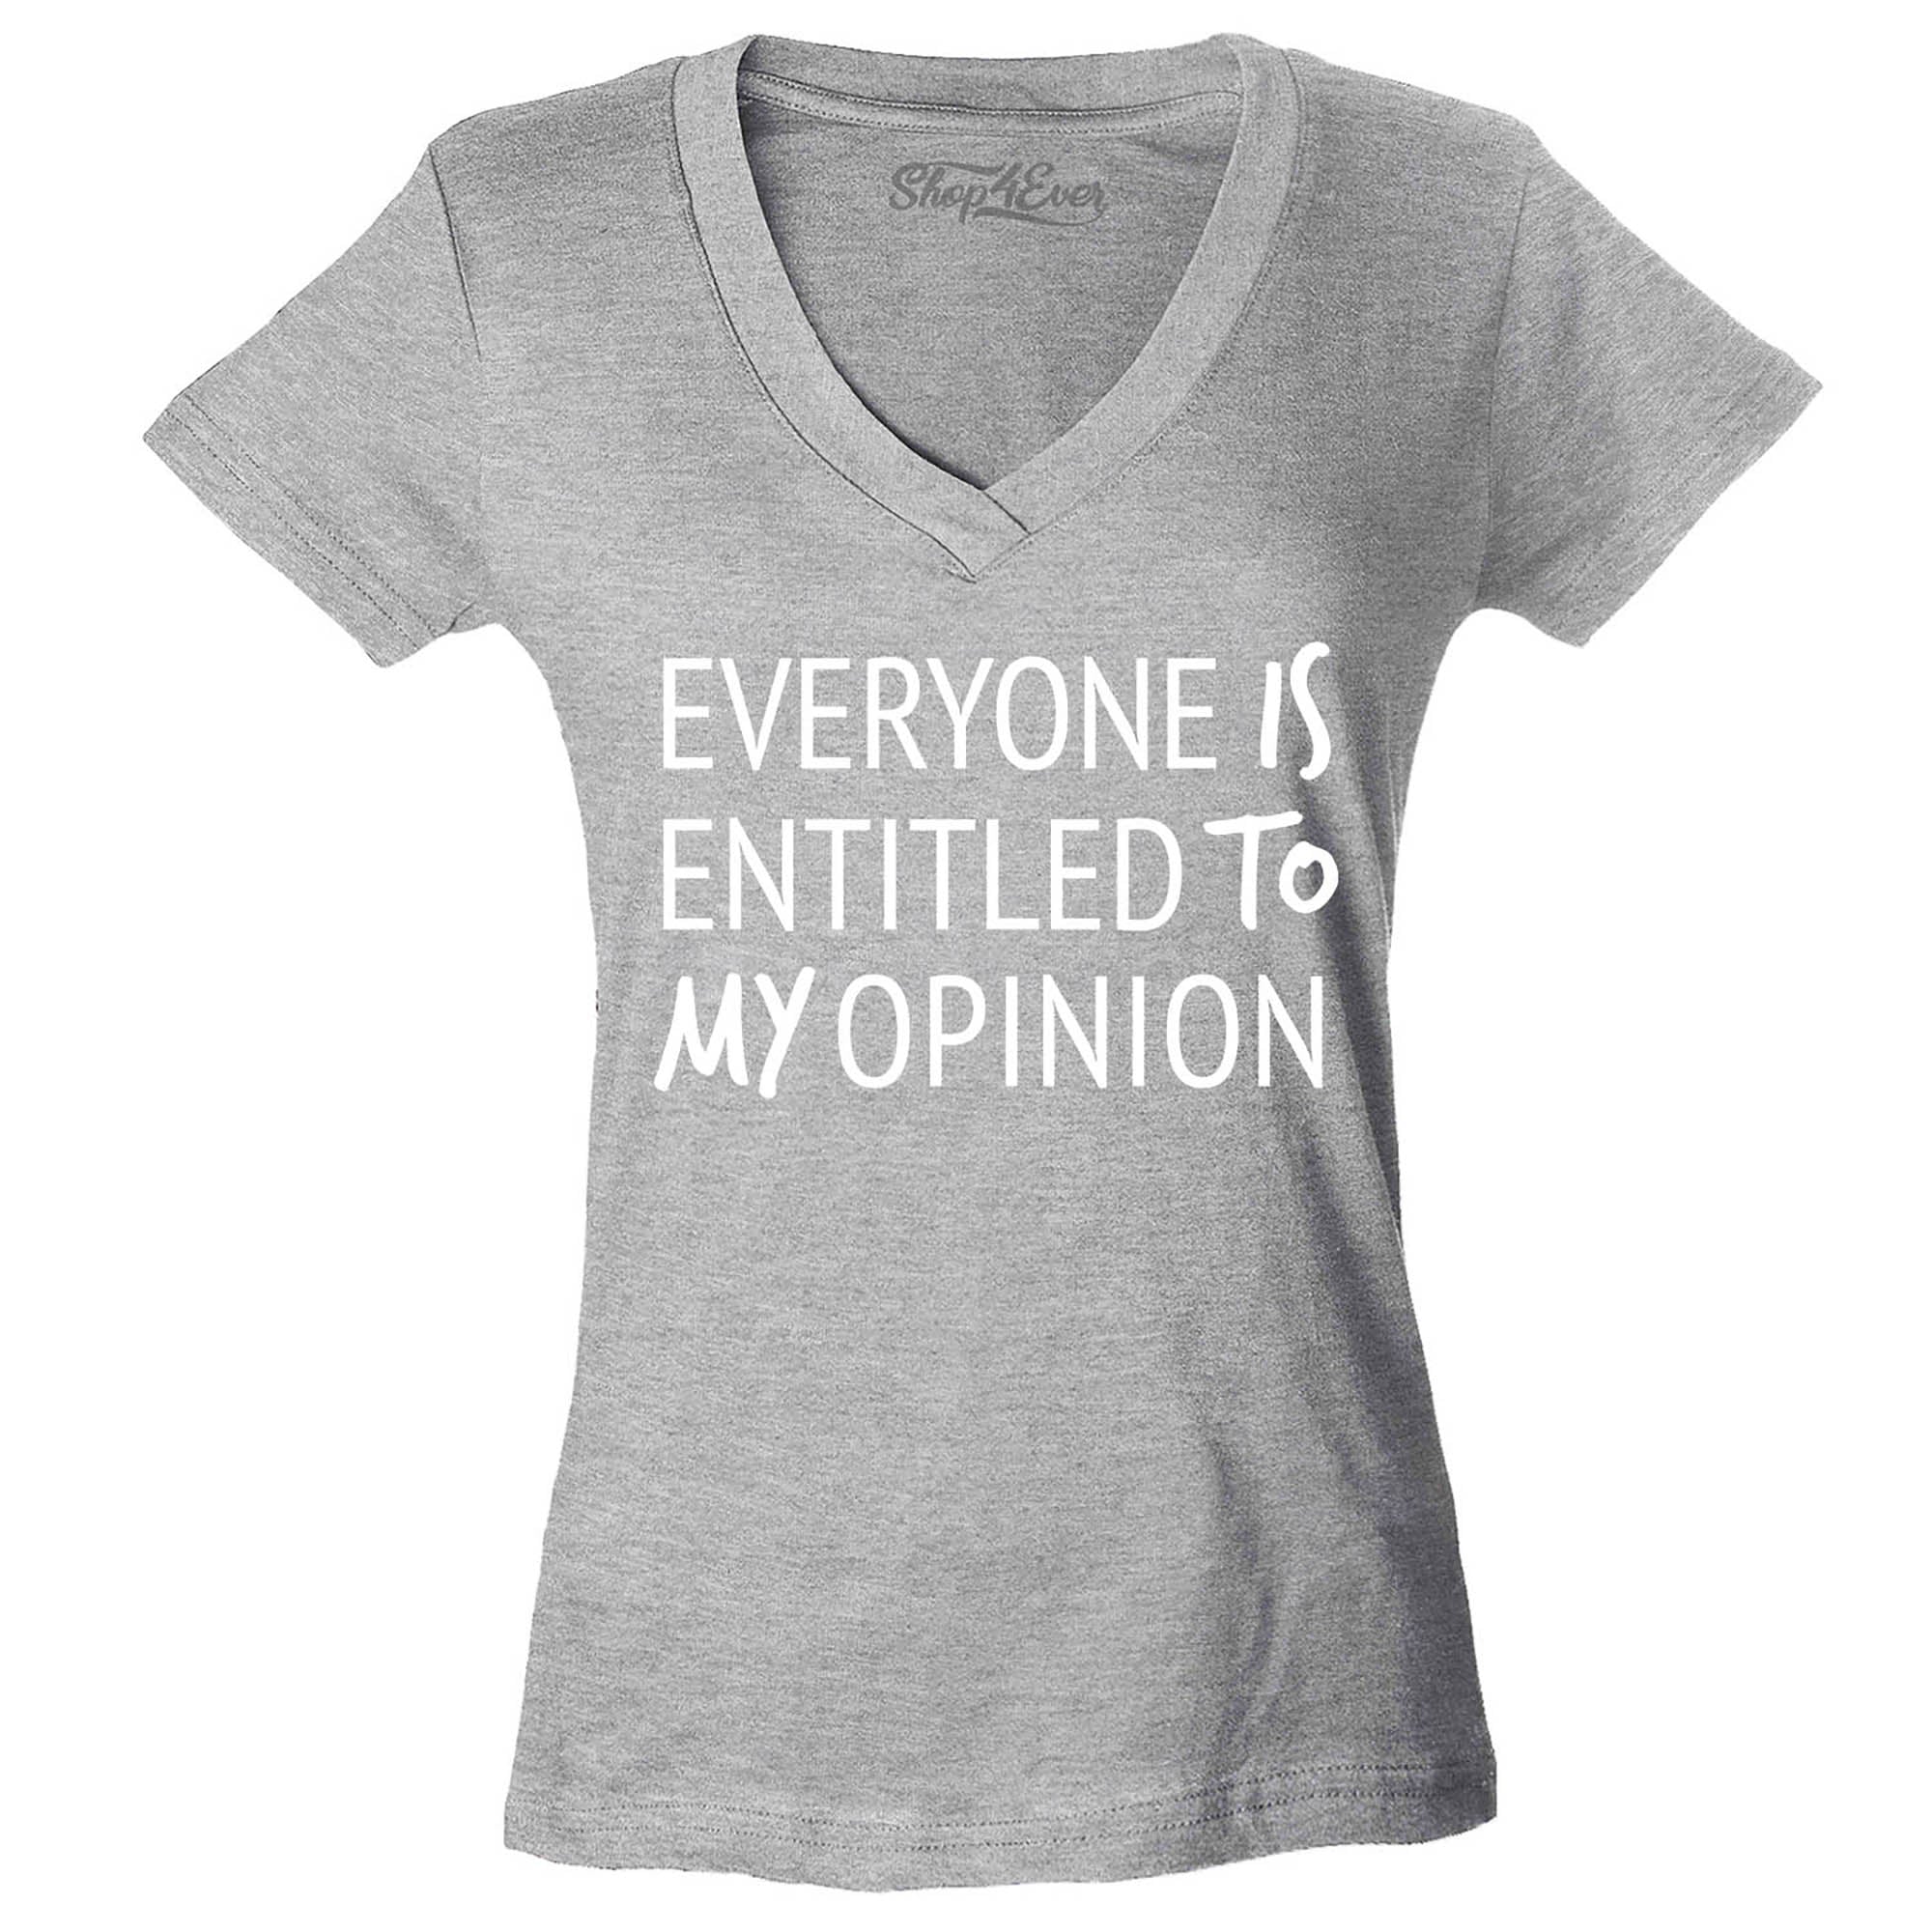 Everyone is Entitled to My Opinion Funny Sarcastic Women's V-Neck T-Shirt Slim Fit